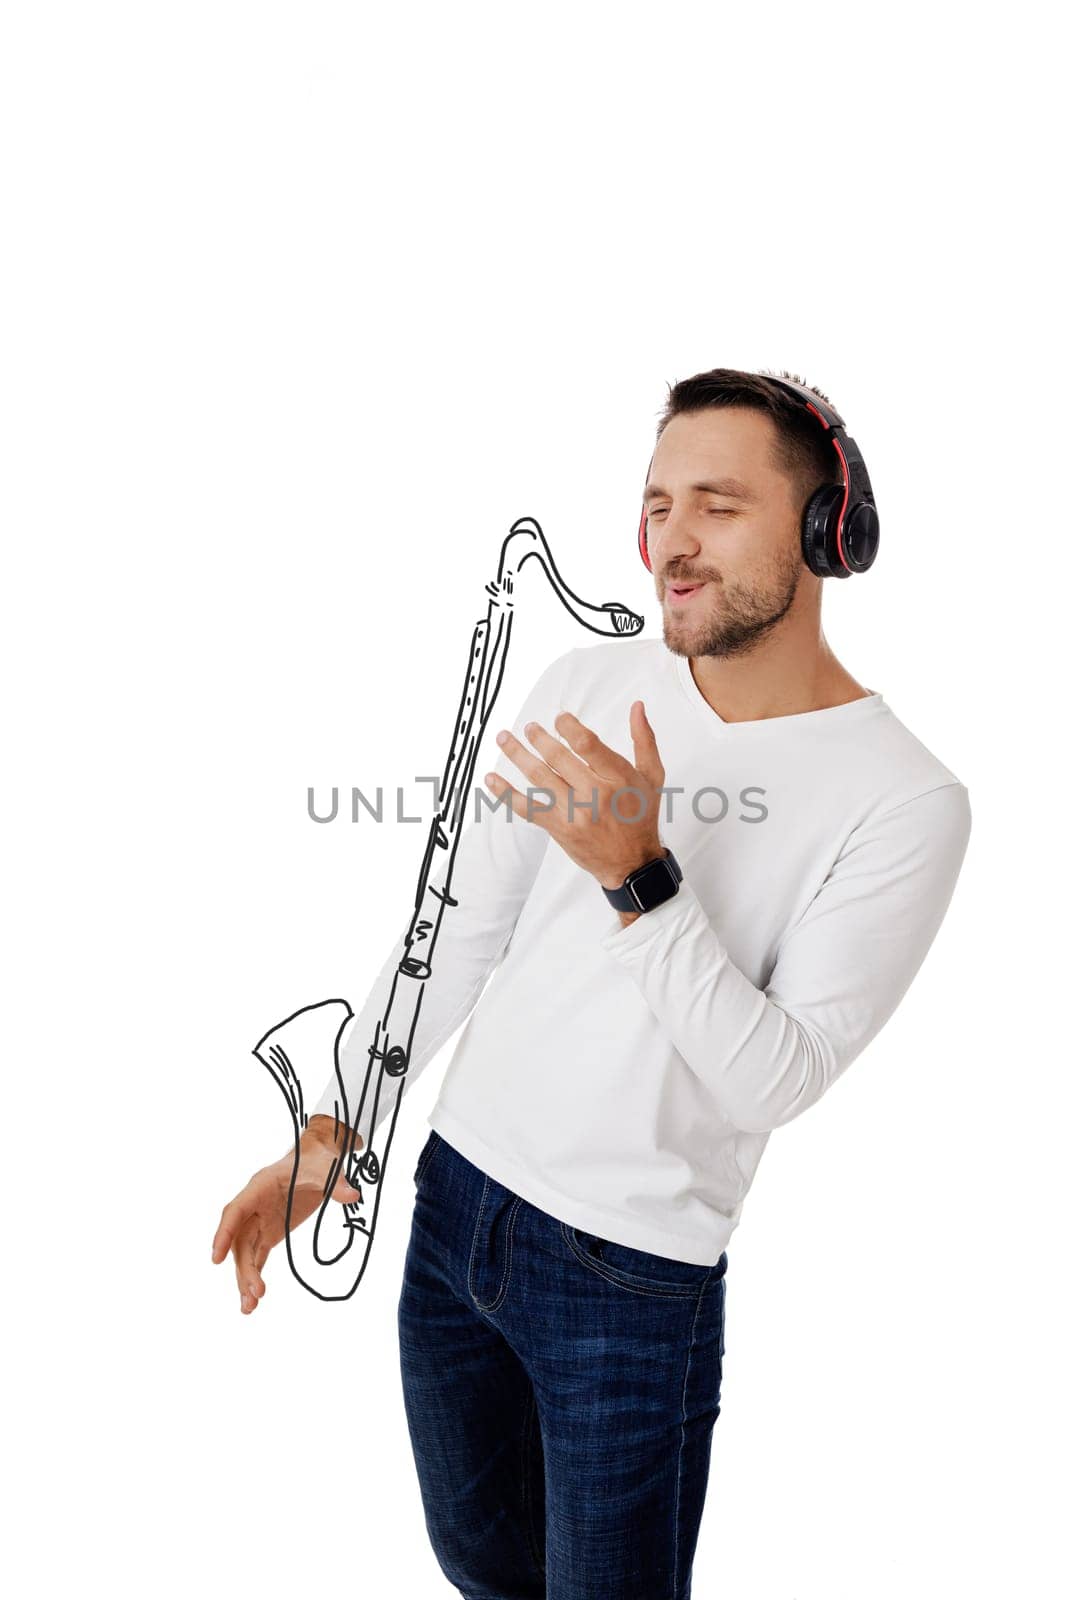 handsome young man in headphones listening to music and playing an imaginary saxophone isolated on white background.